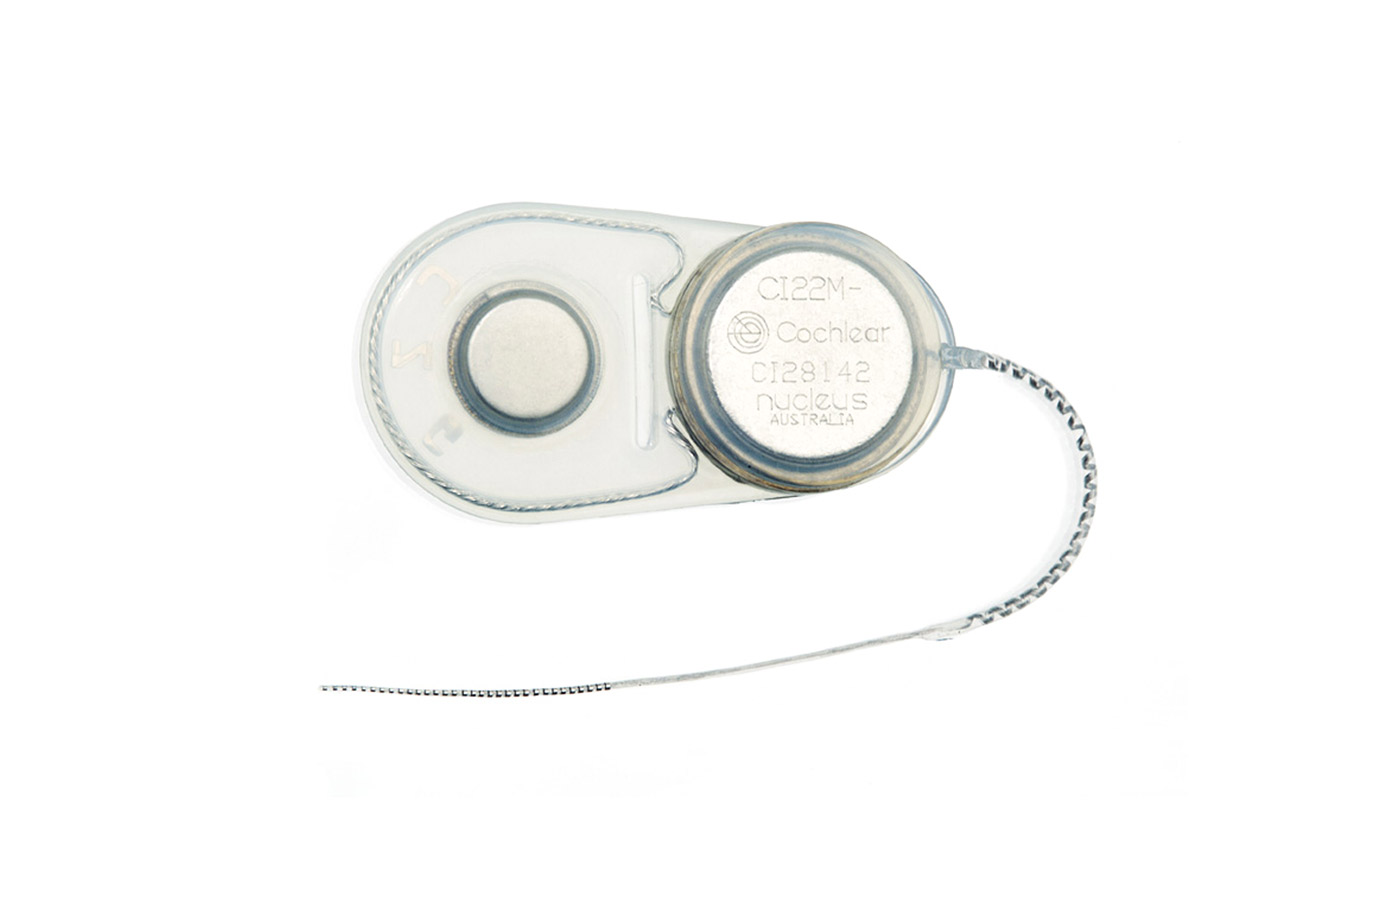 A Cochlear implant